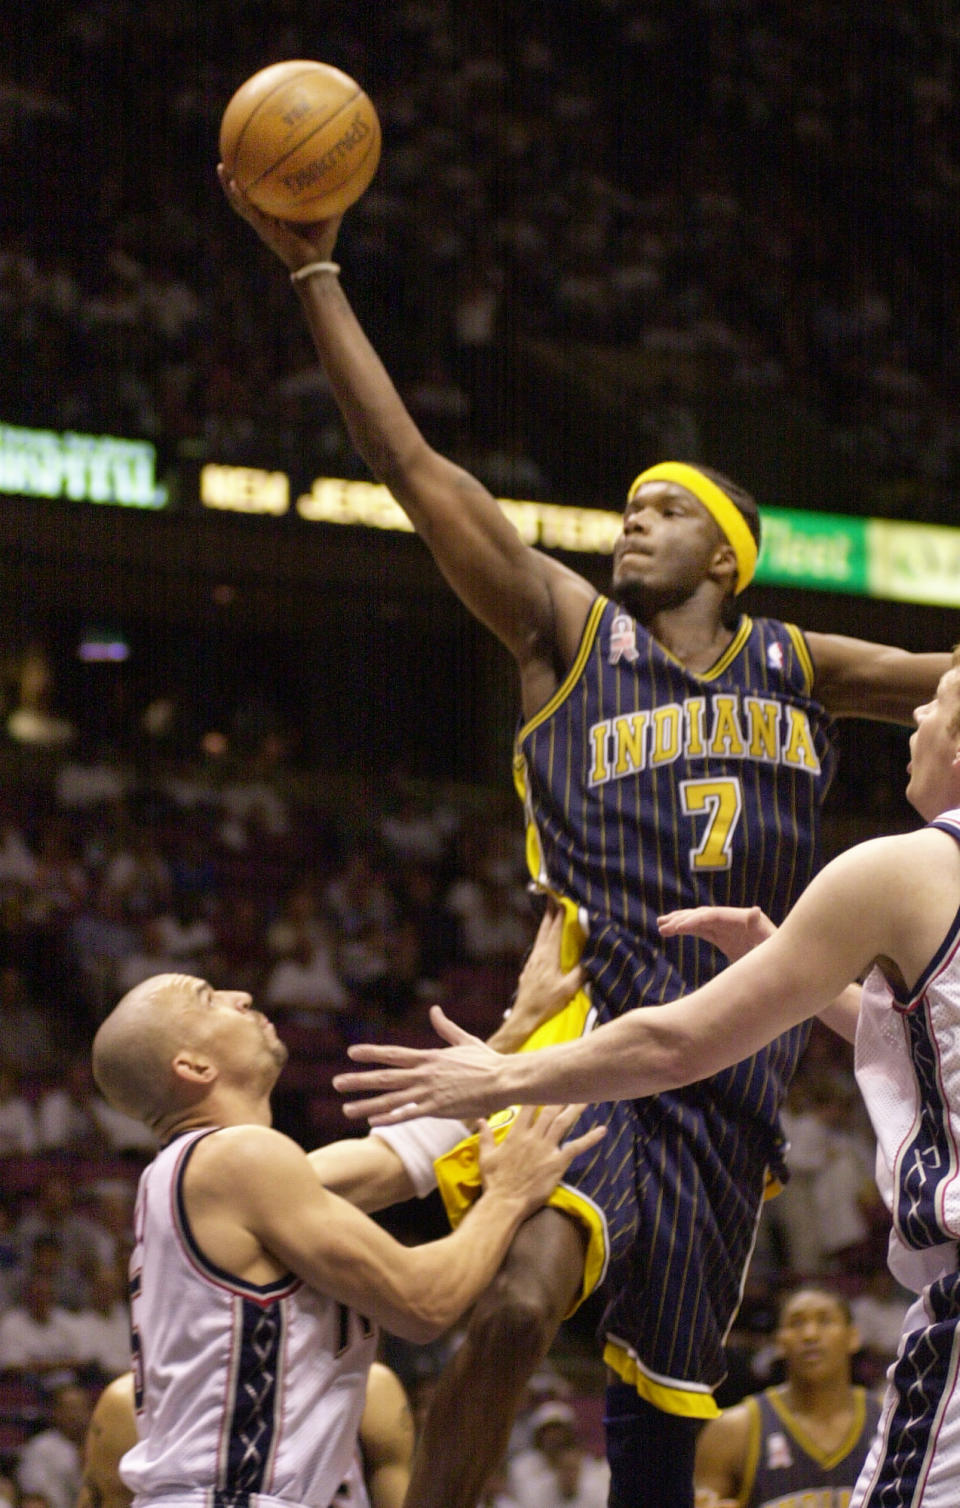 <p>Jermaine O’Neal skipped college and was selected by the Portland Trail Blazers with the 17th overall pick. Since O’Neal is from South Carolina, it would make sense that he might have attended South Carolina to play college hoops. </p>